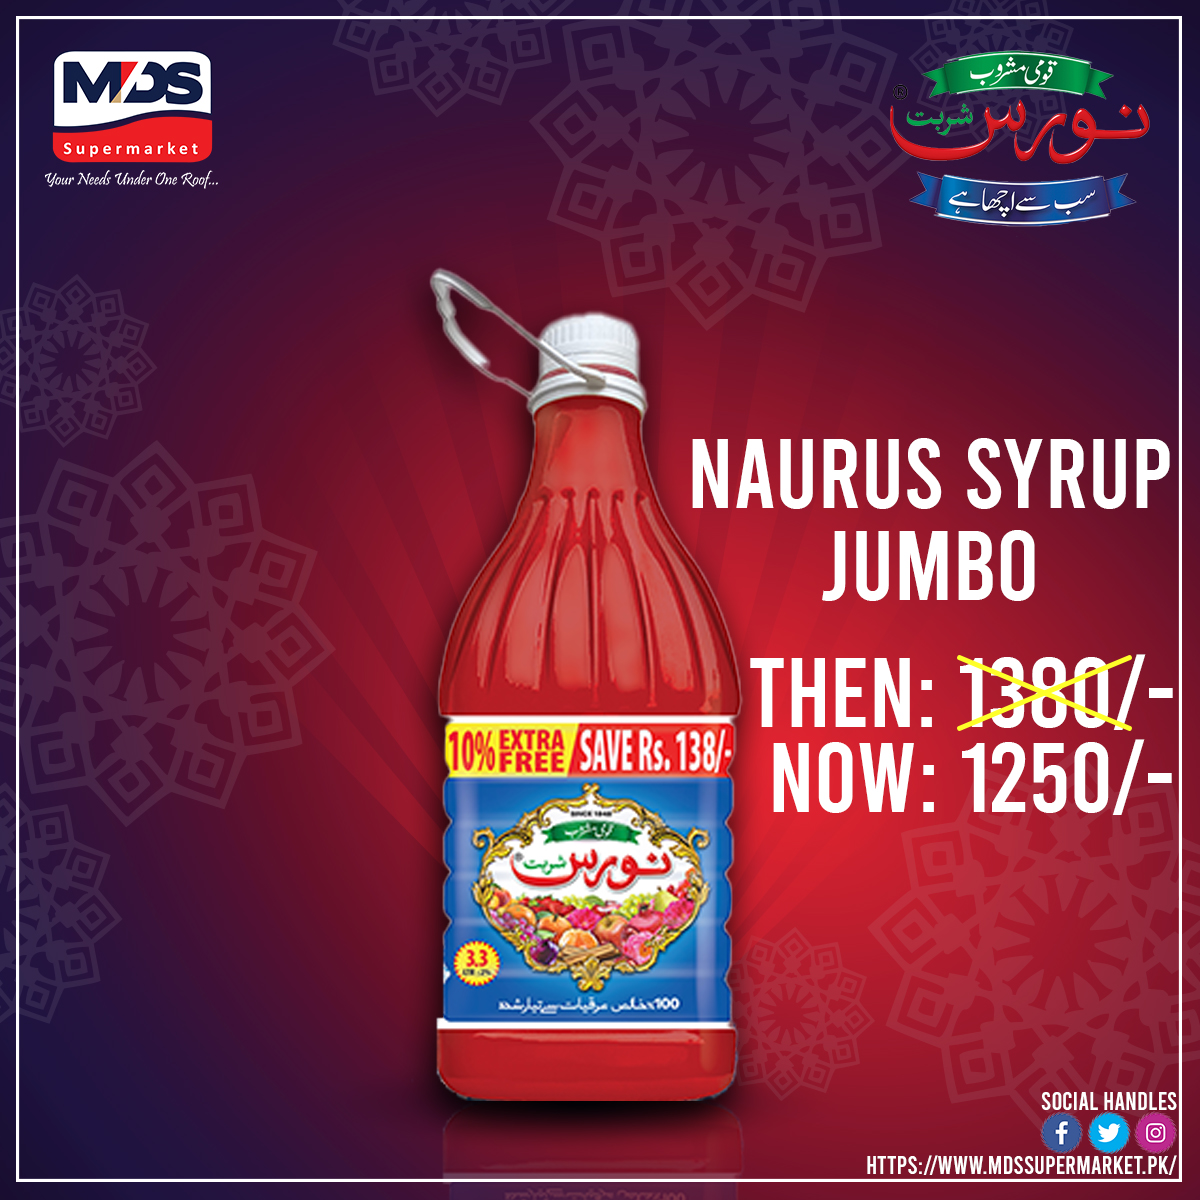 🛒 Visit us today at our branches:
📍 Branch 1: Toghi Road, Quetta. 📞 (081-2823444)
📍 Branch 2: Quarry Road, Quetta. 📞 (081-2823420)

#NaurusSyrup #JumboPack #SpecialOffer #MDSsupermarket #QuettaShopping #SaveMoney #RefreshingDrinks #ShopNow #HassleFreeShopping #Quetta #Paki